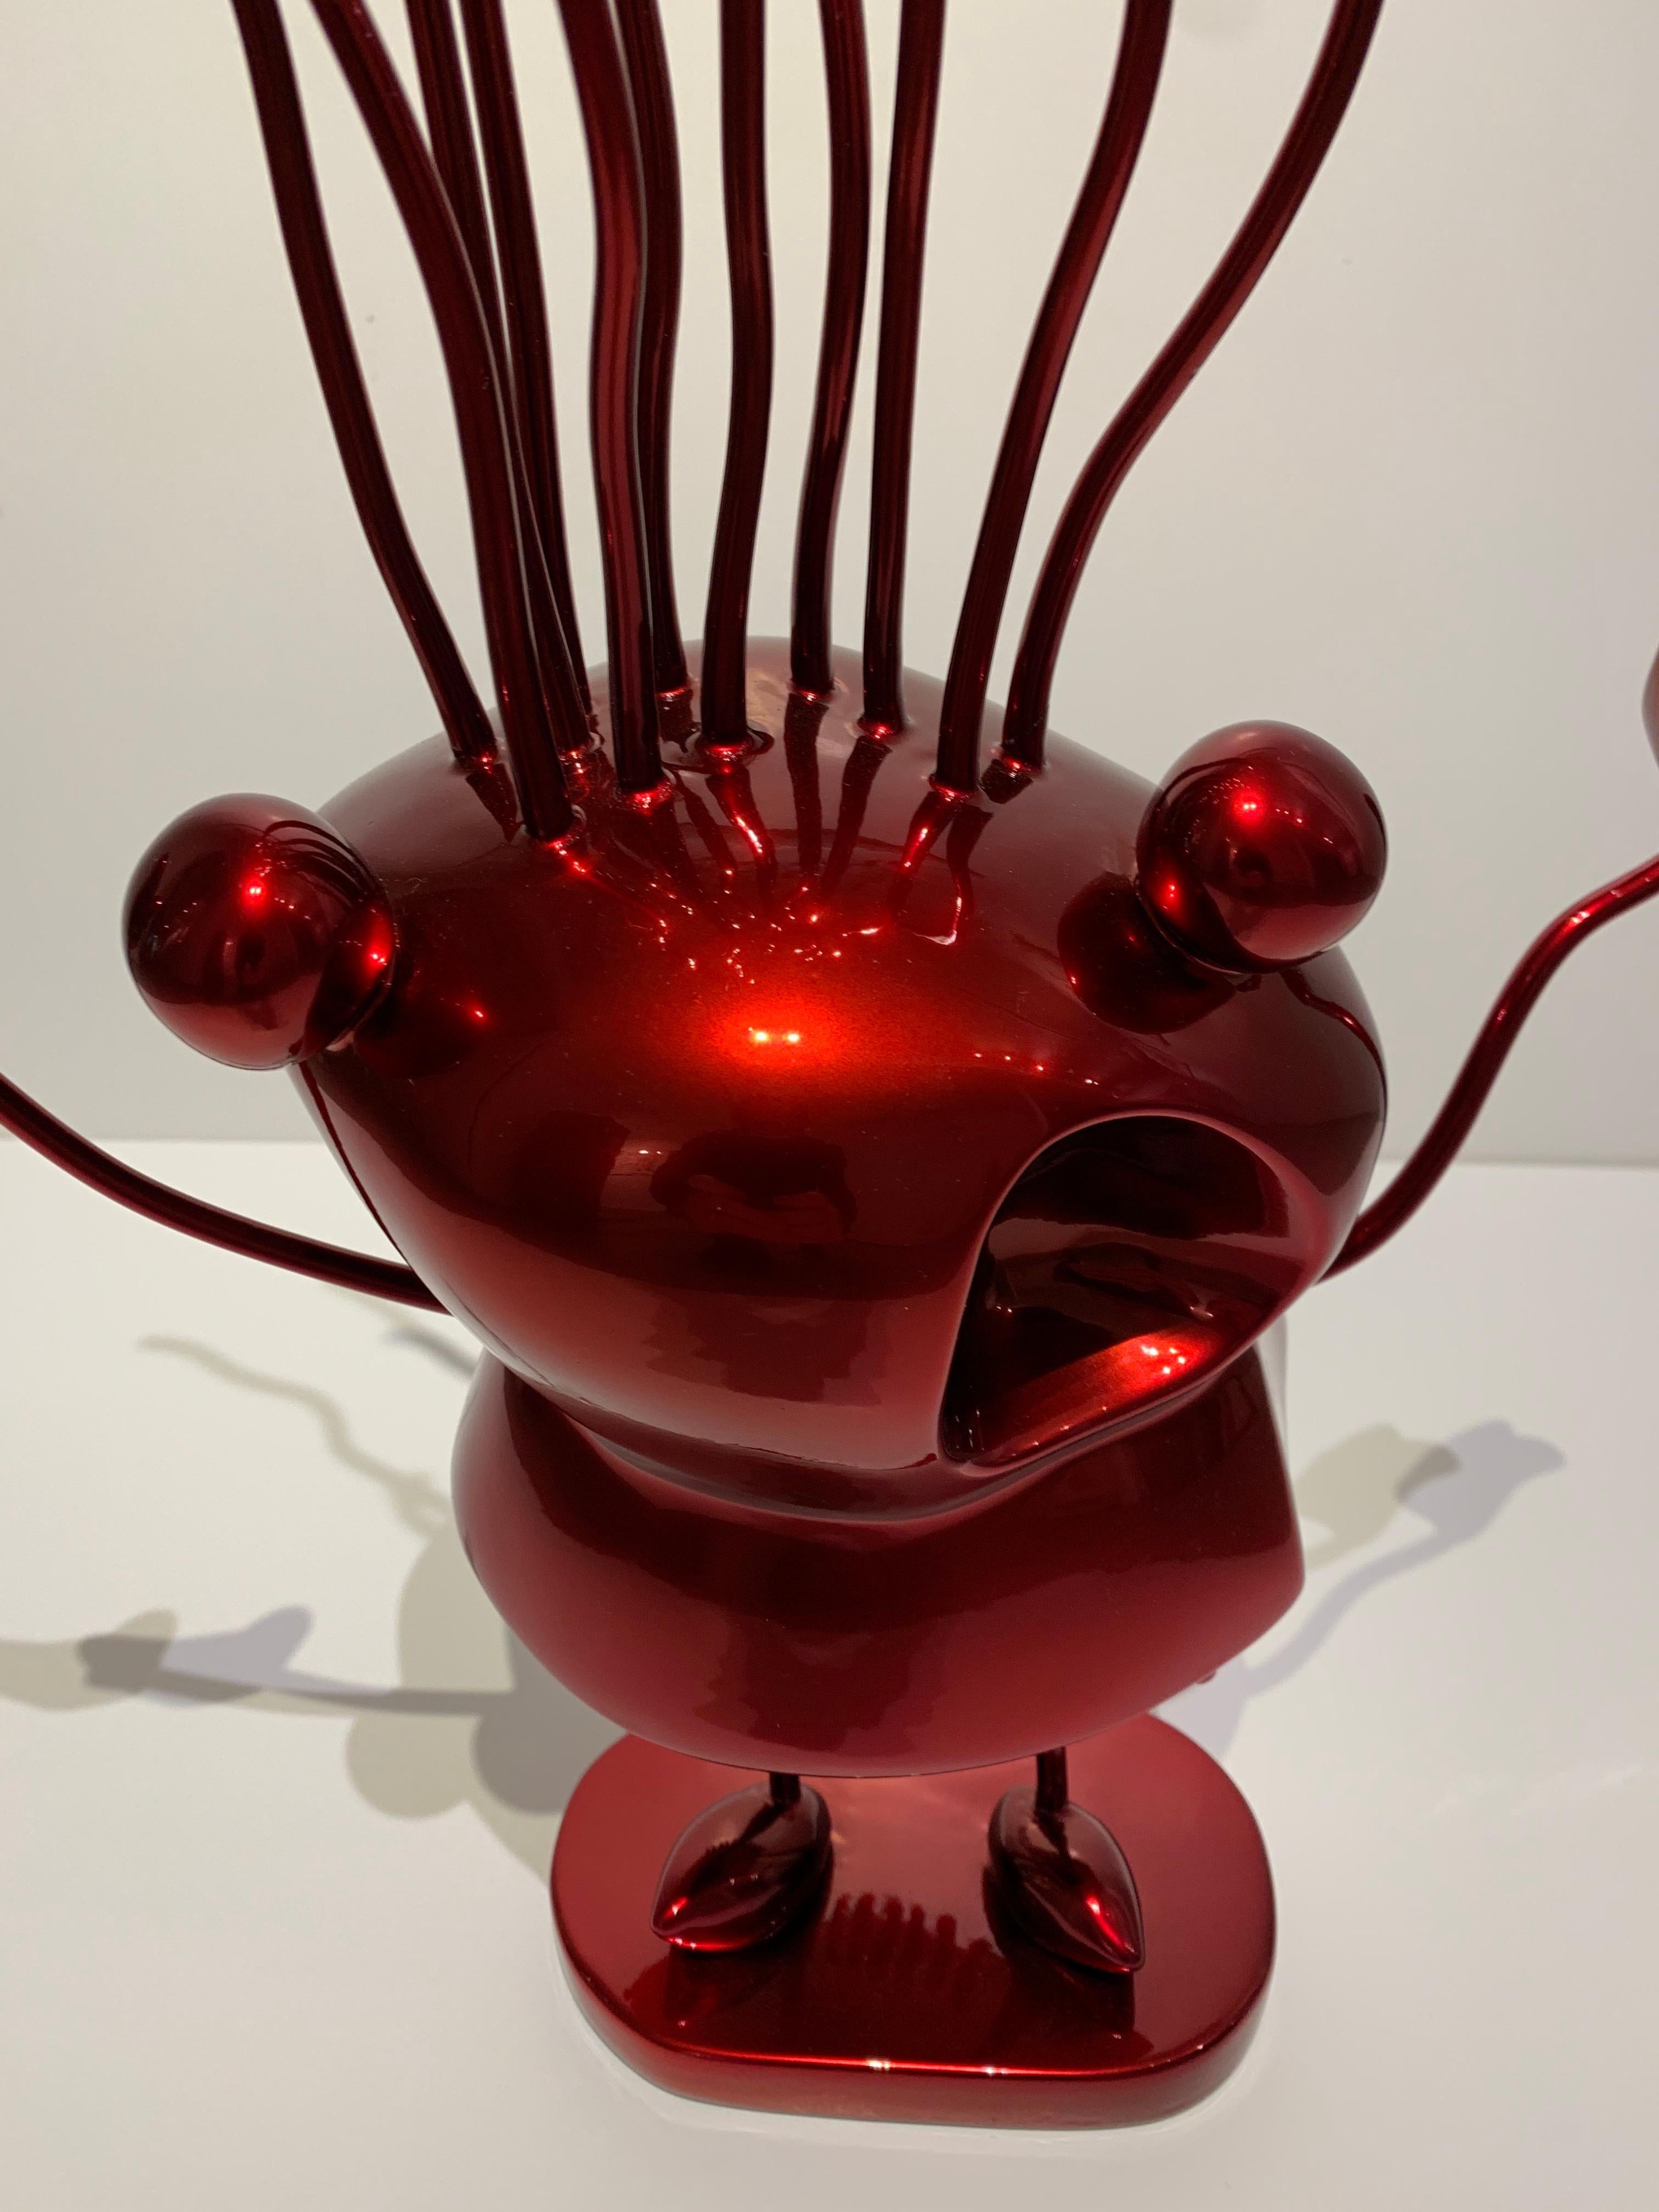 Xavi Carbonell, Le Petite Folle, 2019, Hi-Gloss Red Painted Sculpture 4